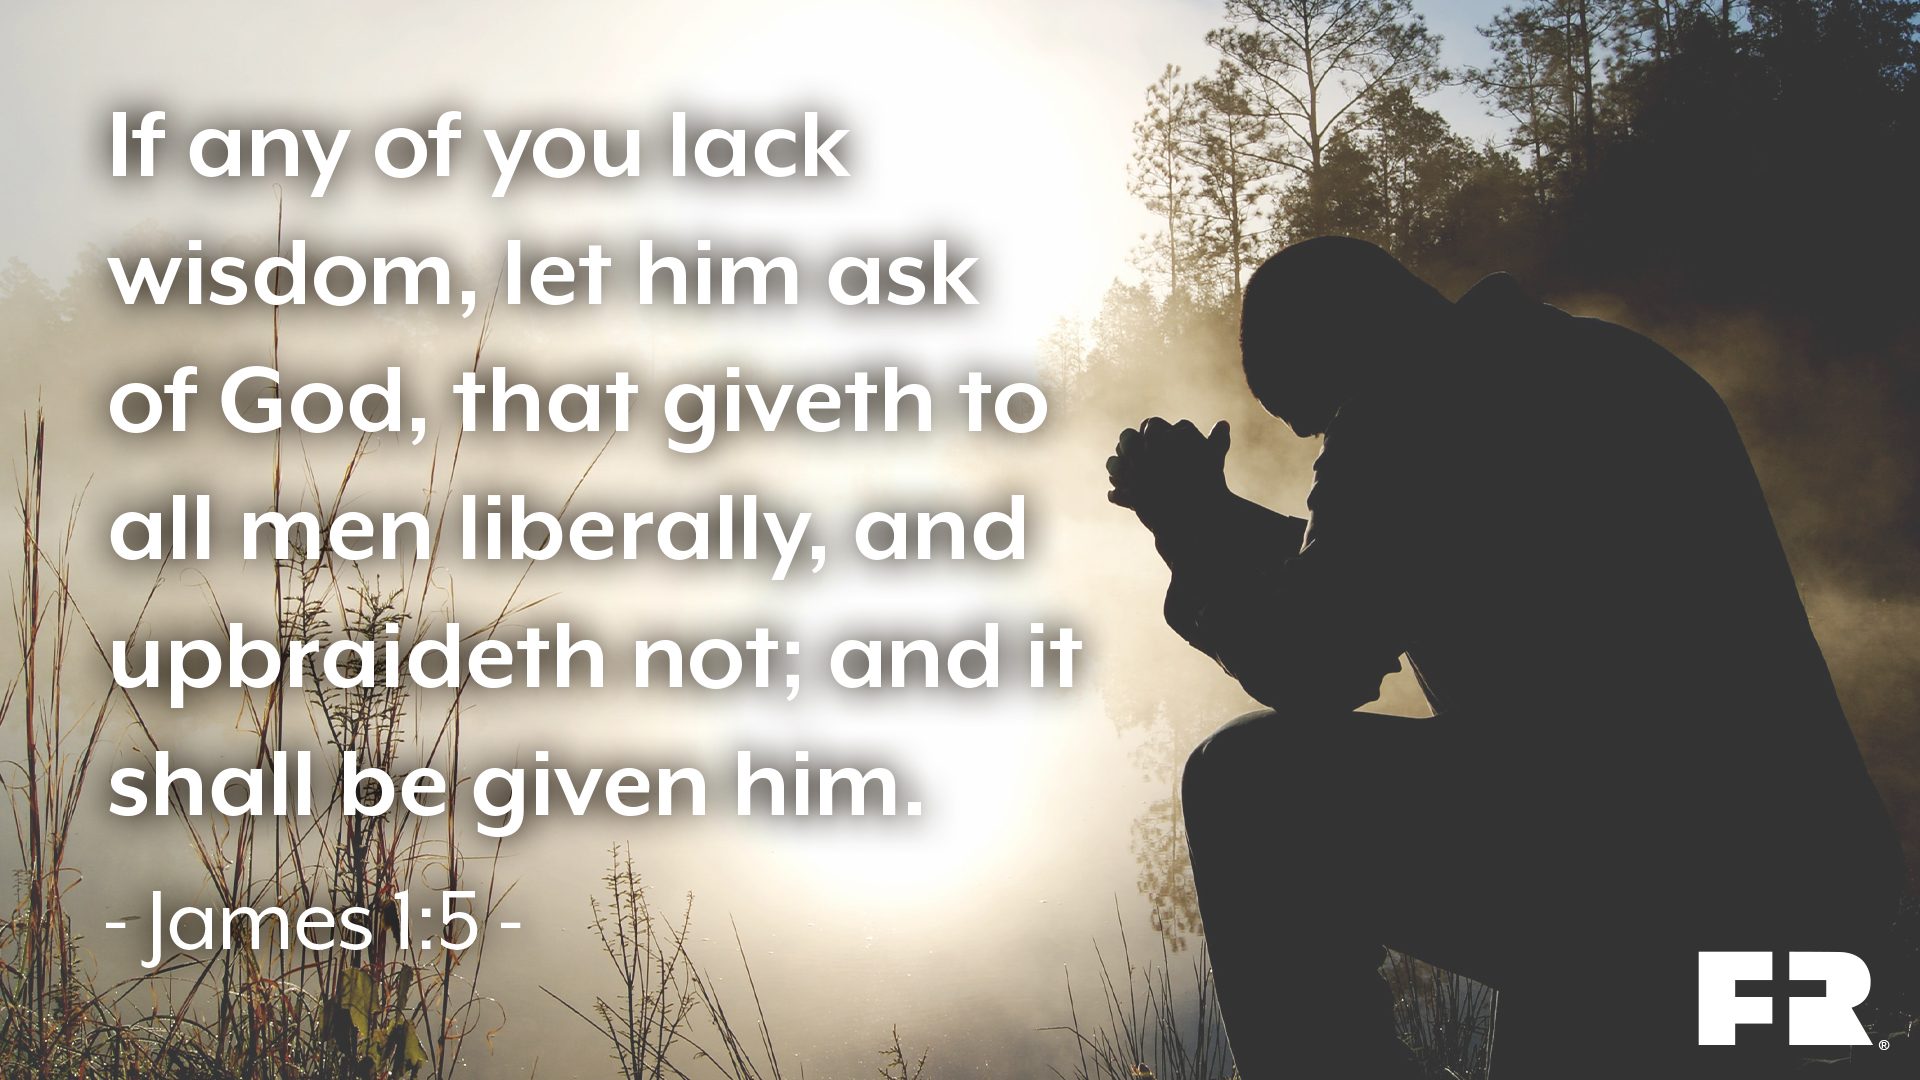 “If any of you lack wisdom, let him ask of God, that giveth to all men liberally, and upbraideth not; and it shall be given him.”